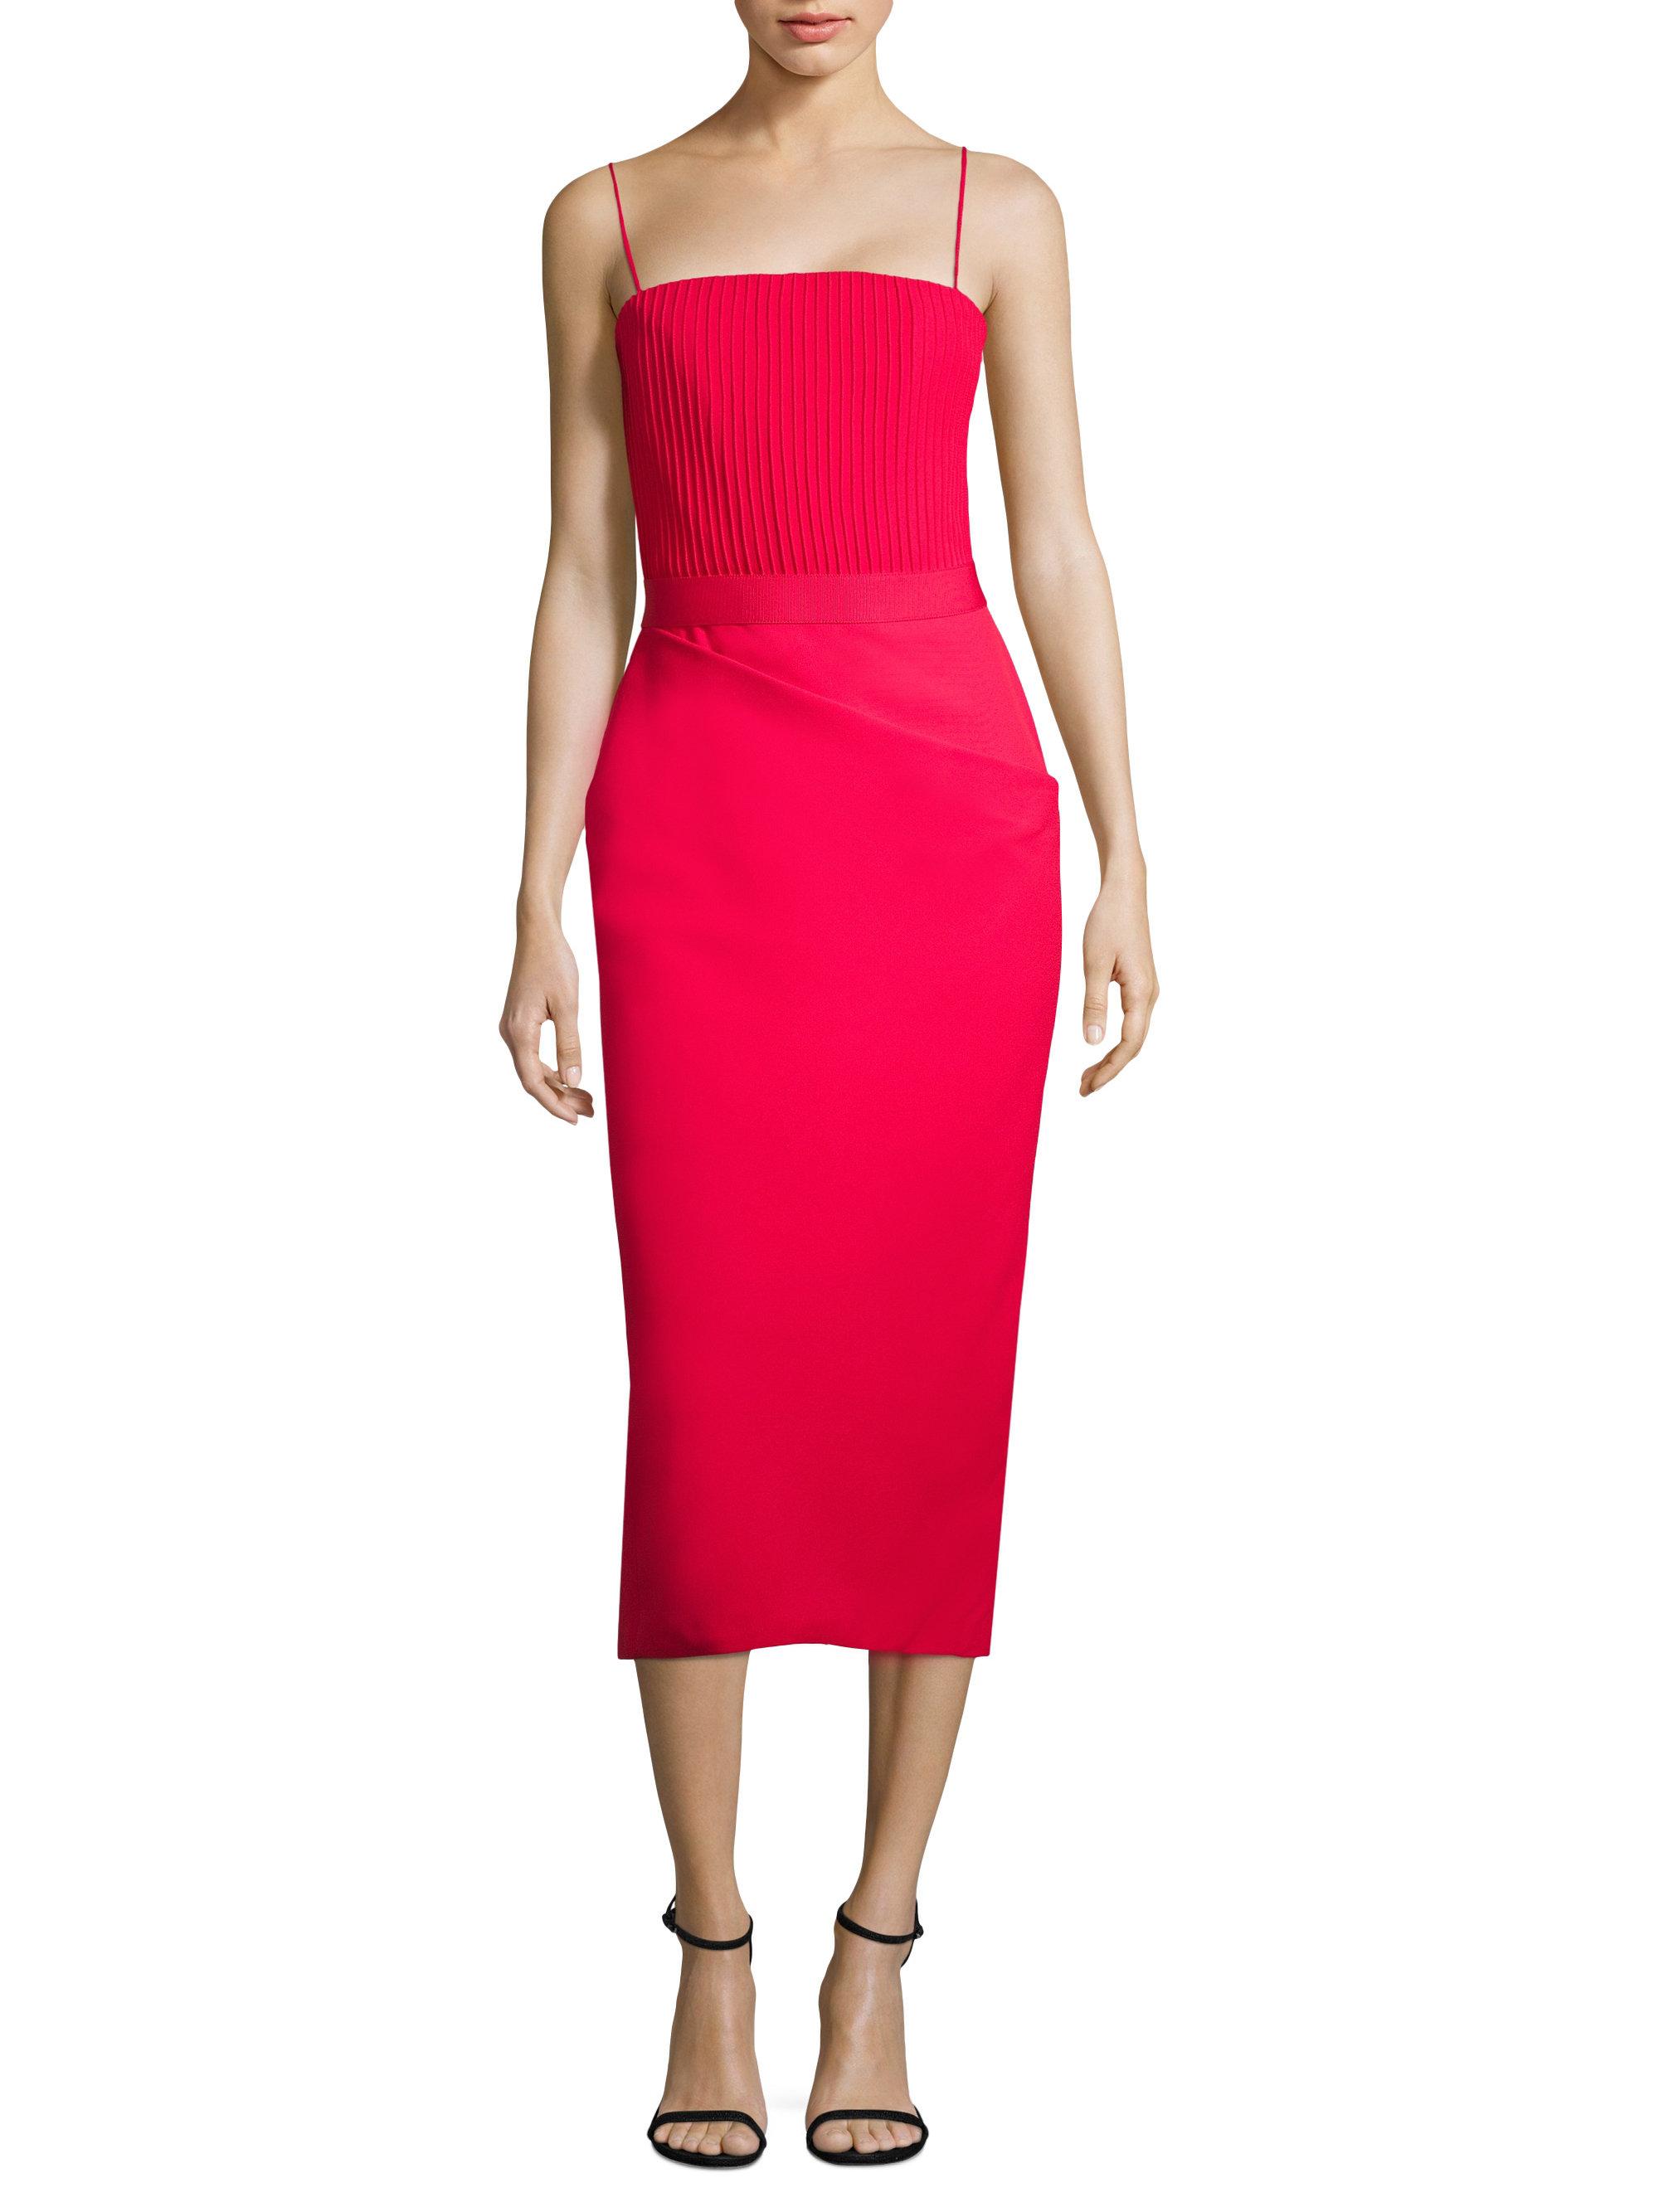 Brandon Maxwell Synthetic Sleeveless Ribbed Dress in Red - Lyst